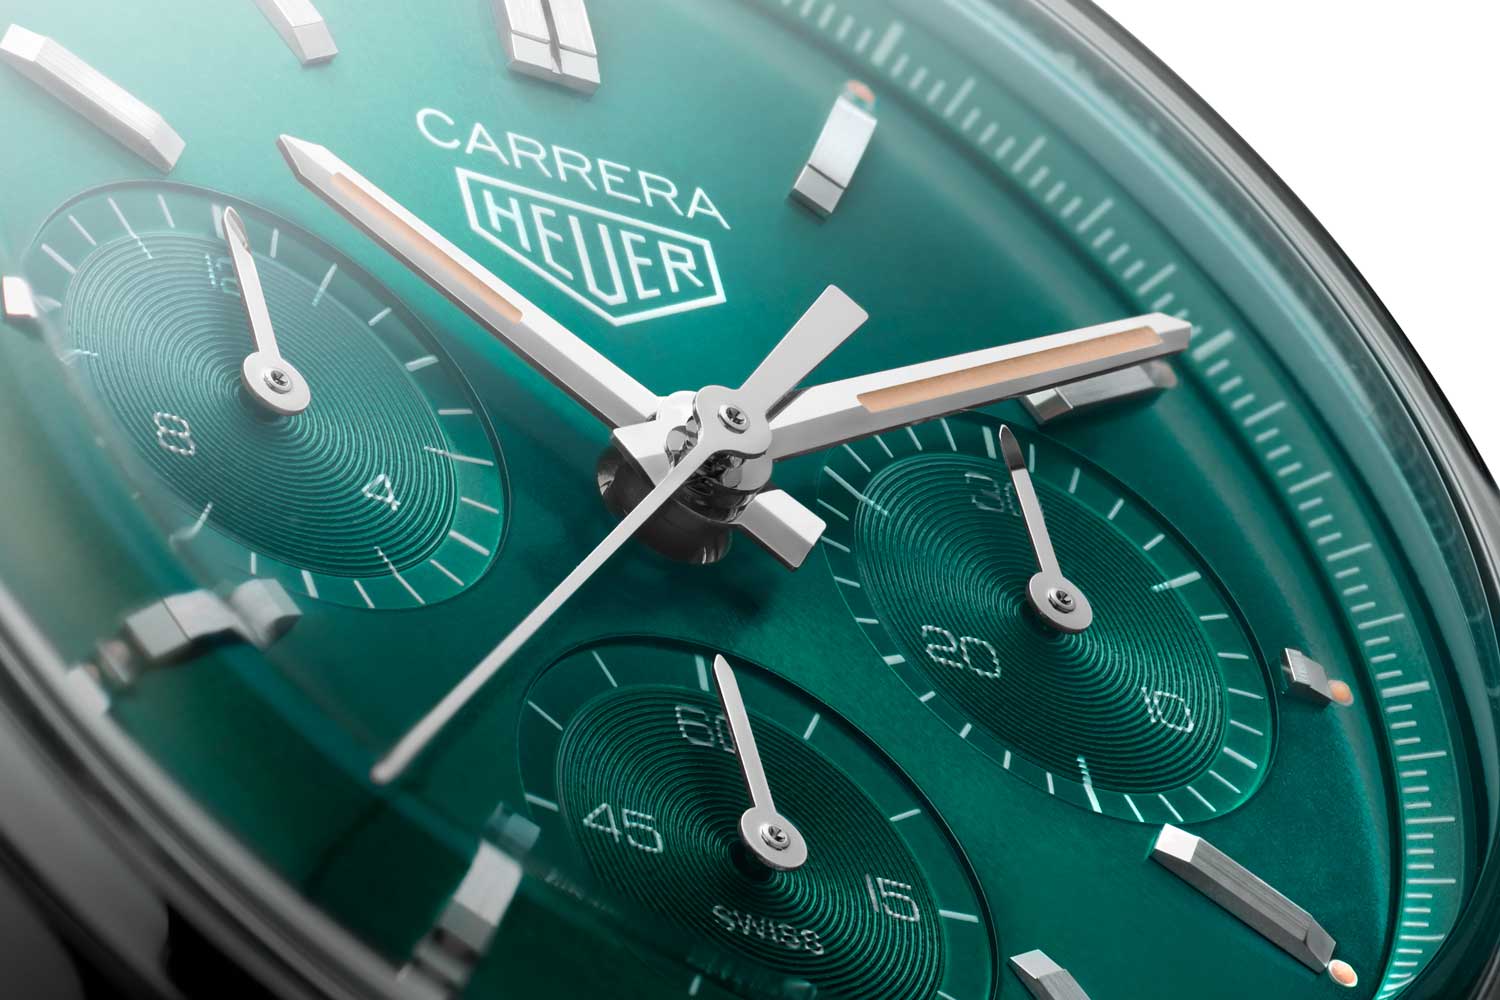 The 39 mm case of the new watch is reminiscent of the 1963 ref. 2447, the original Carrera developed by Jack Heuer.